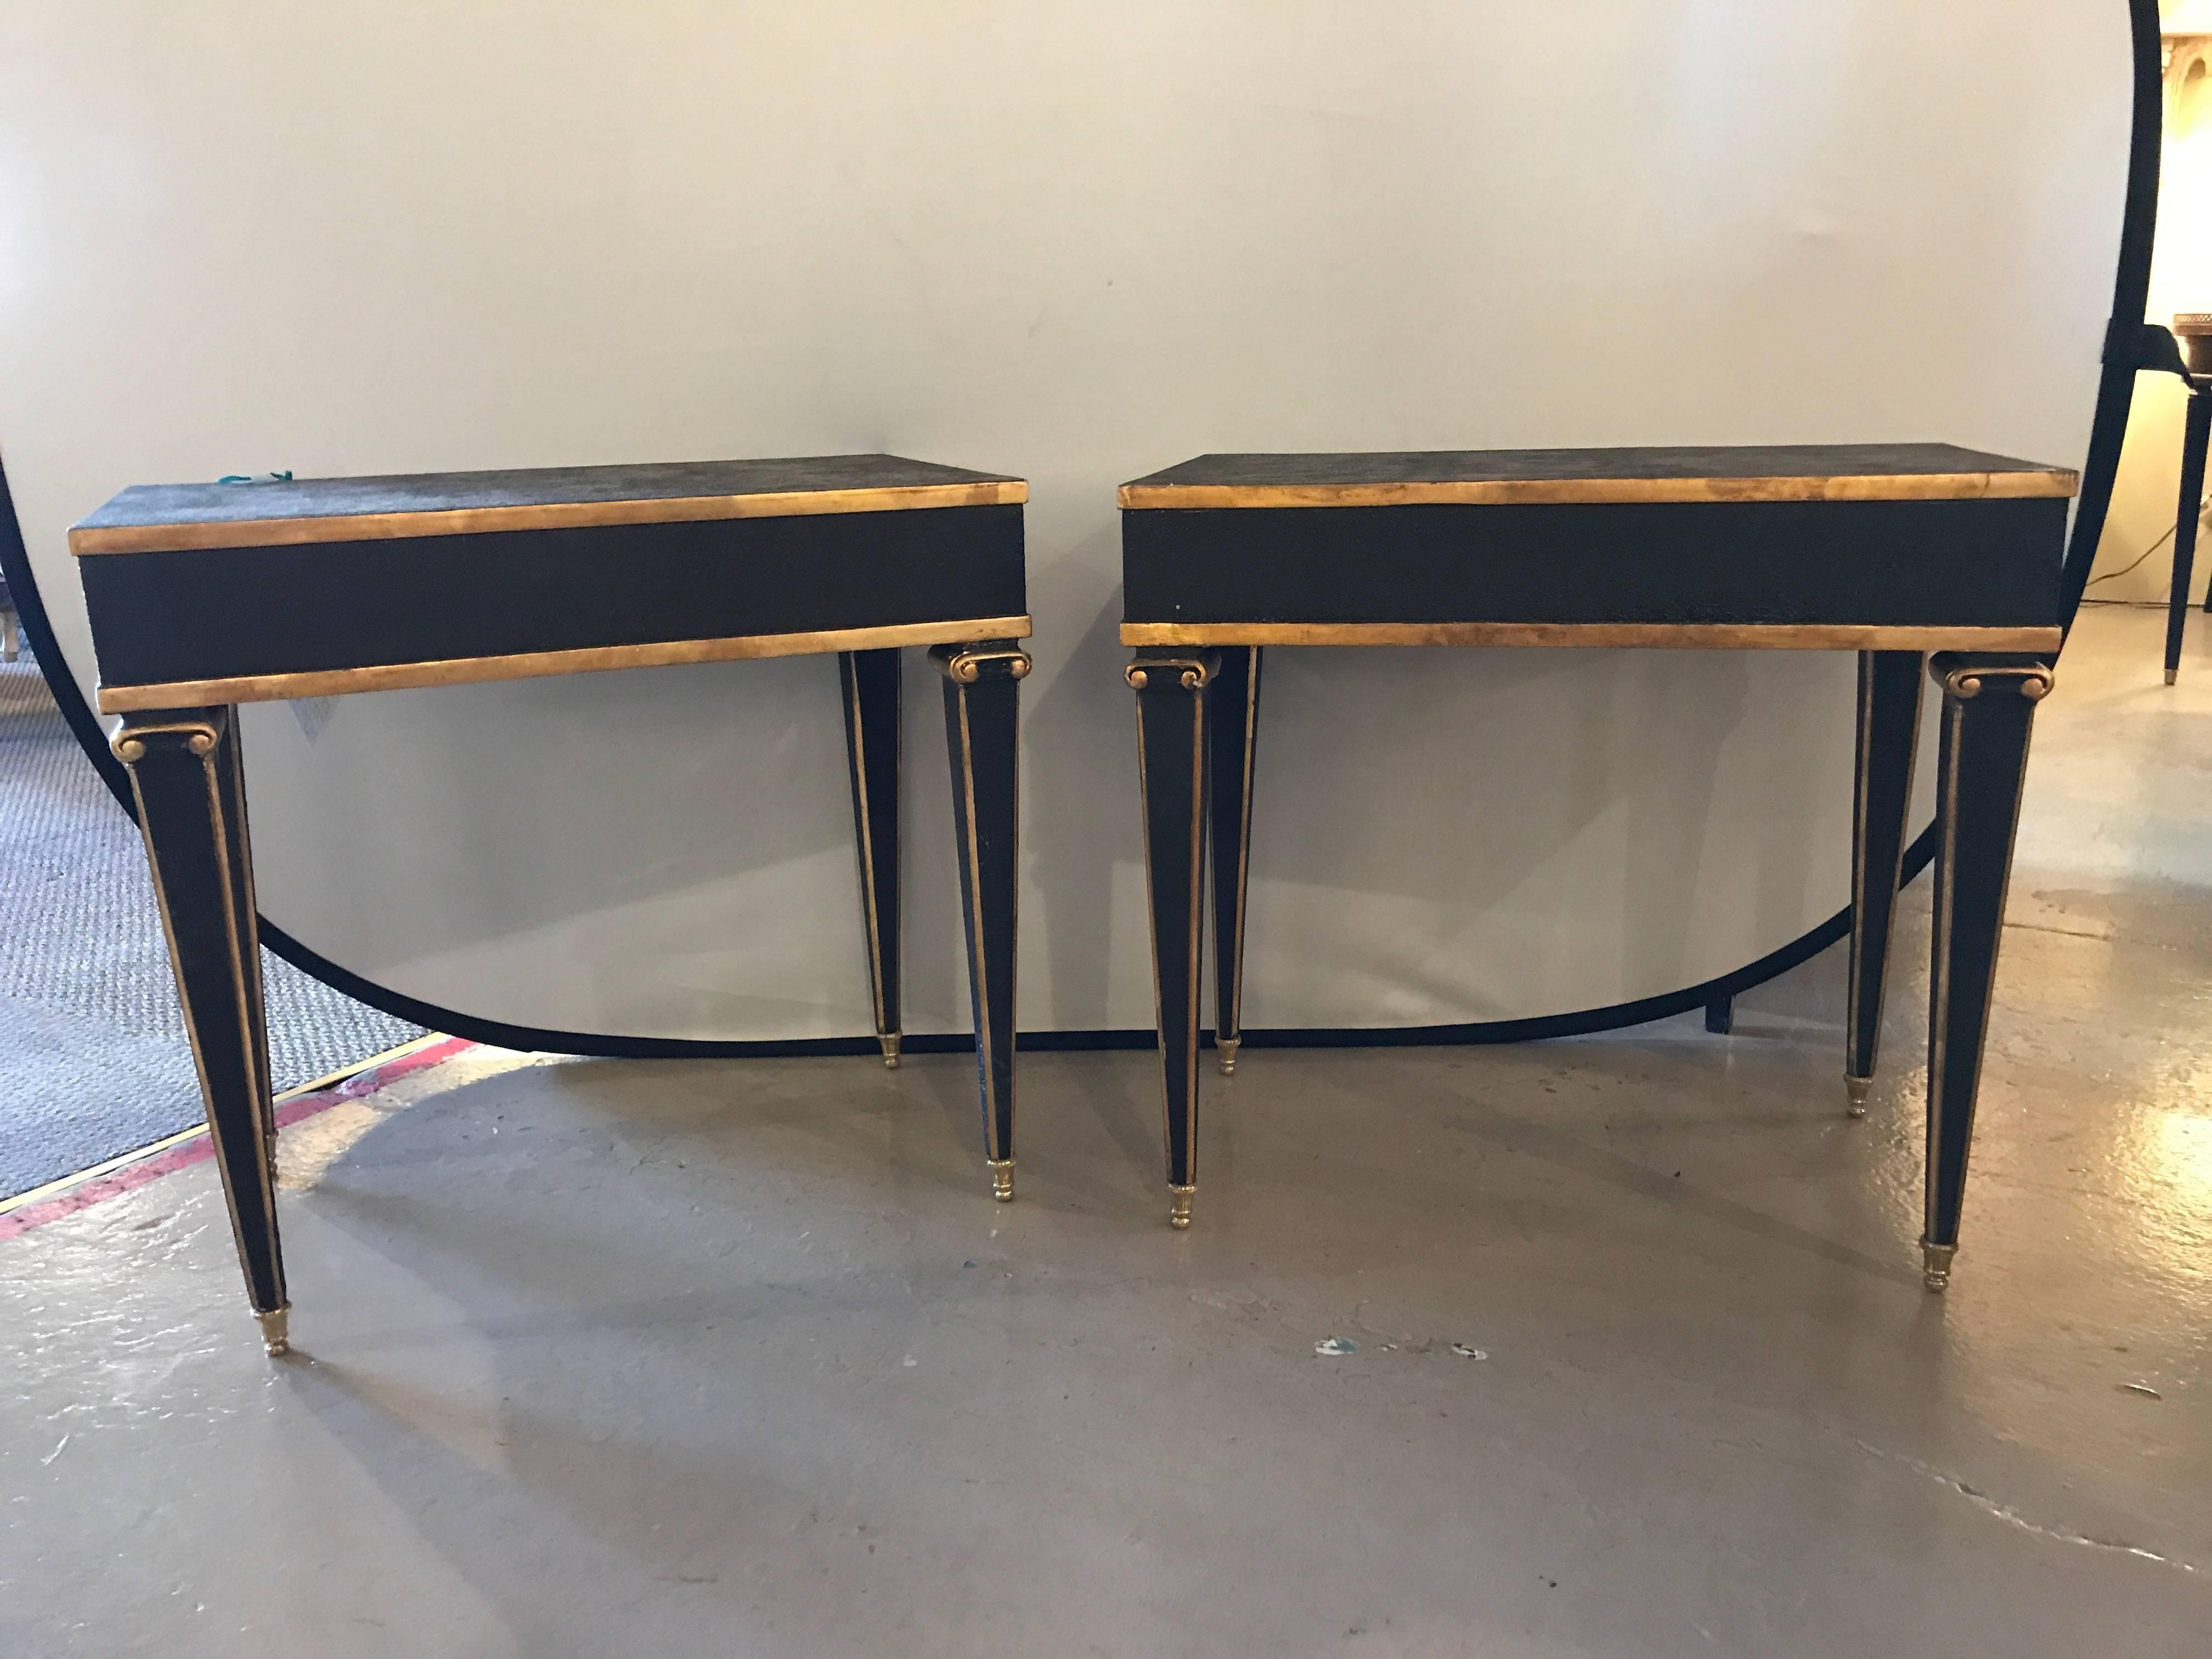 Fine Hollywood Regency style pair of Maison Jansen fashioned end tables with leather top and bronze-mounted legs each distressed in an ebony finish with gilt hi lights with carved tapering legs. This pair modeled after a very popular design by this